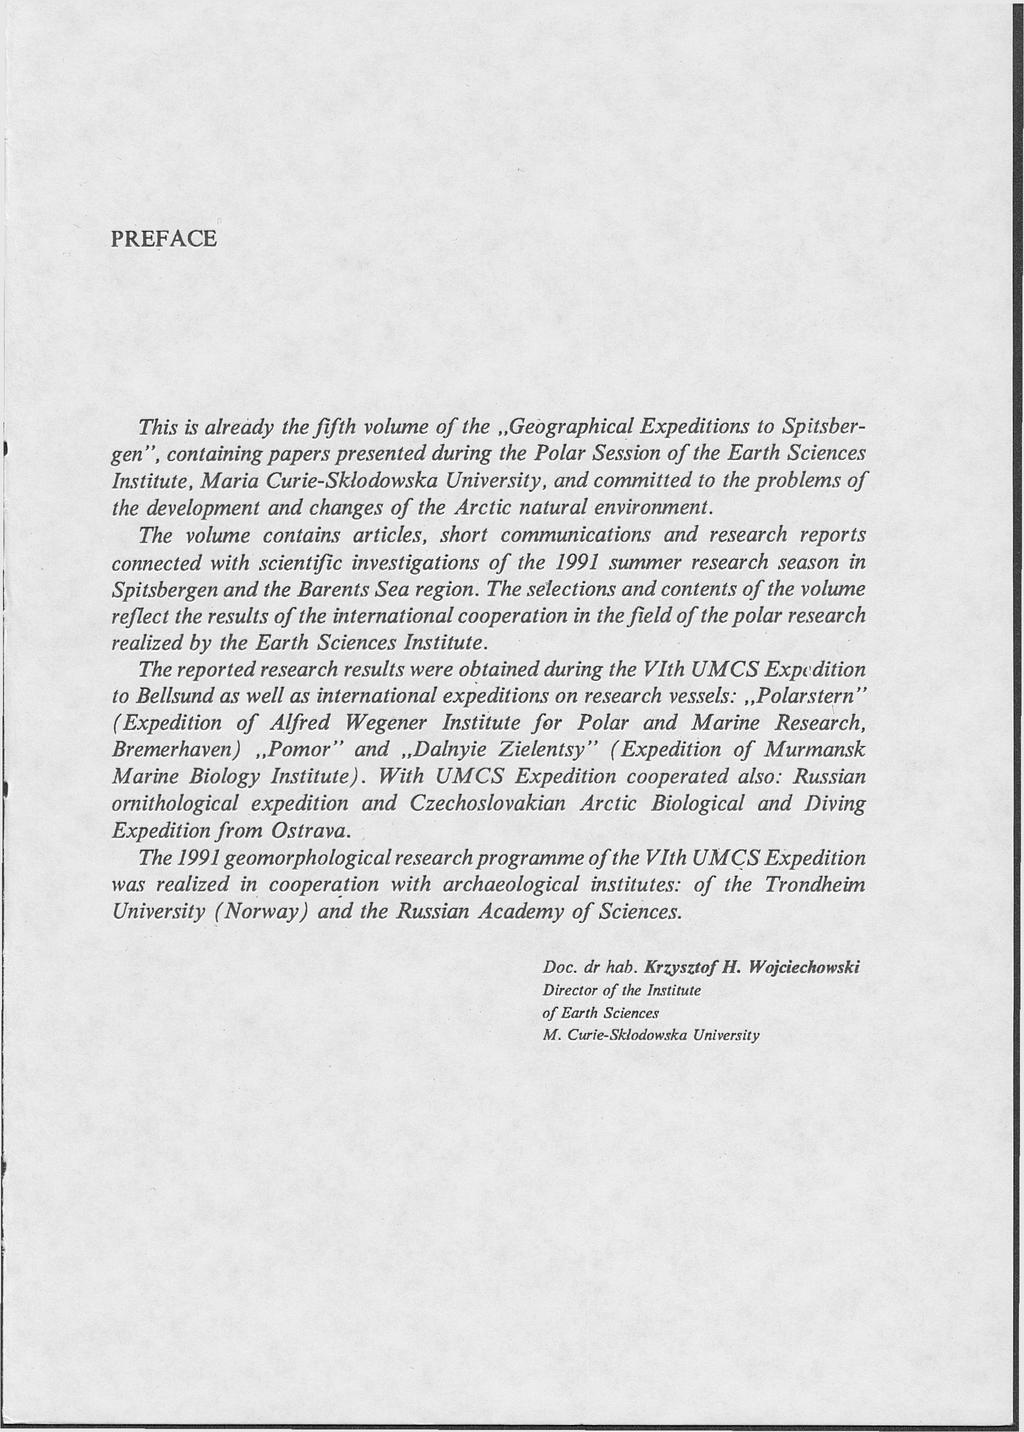 PREFACE This ii already the fifth volume of the Geographical Expeditions to Spitsbergen", containing papers presented during the Polar Session of the Earth Sciences Institute, Maria Curie-Sklodowska